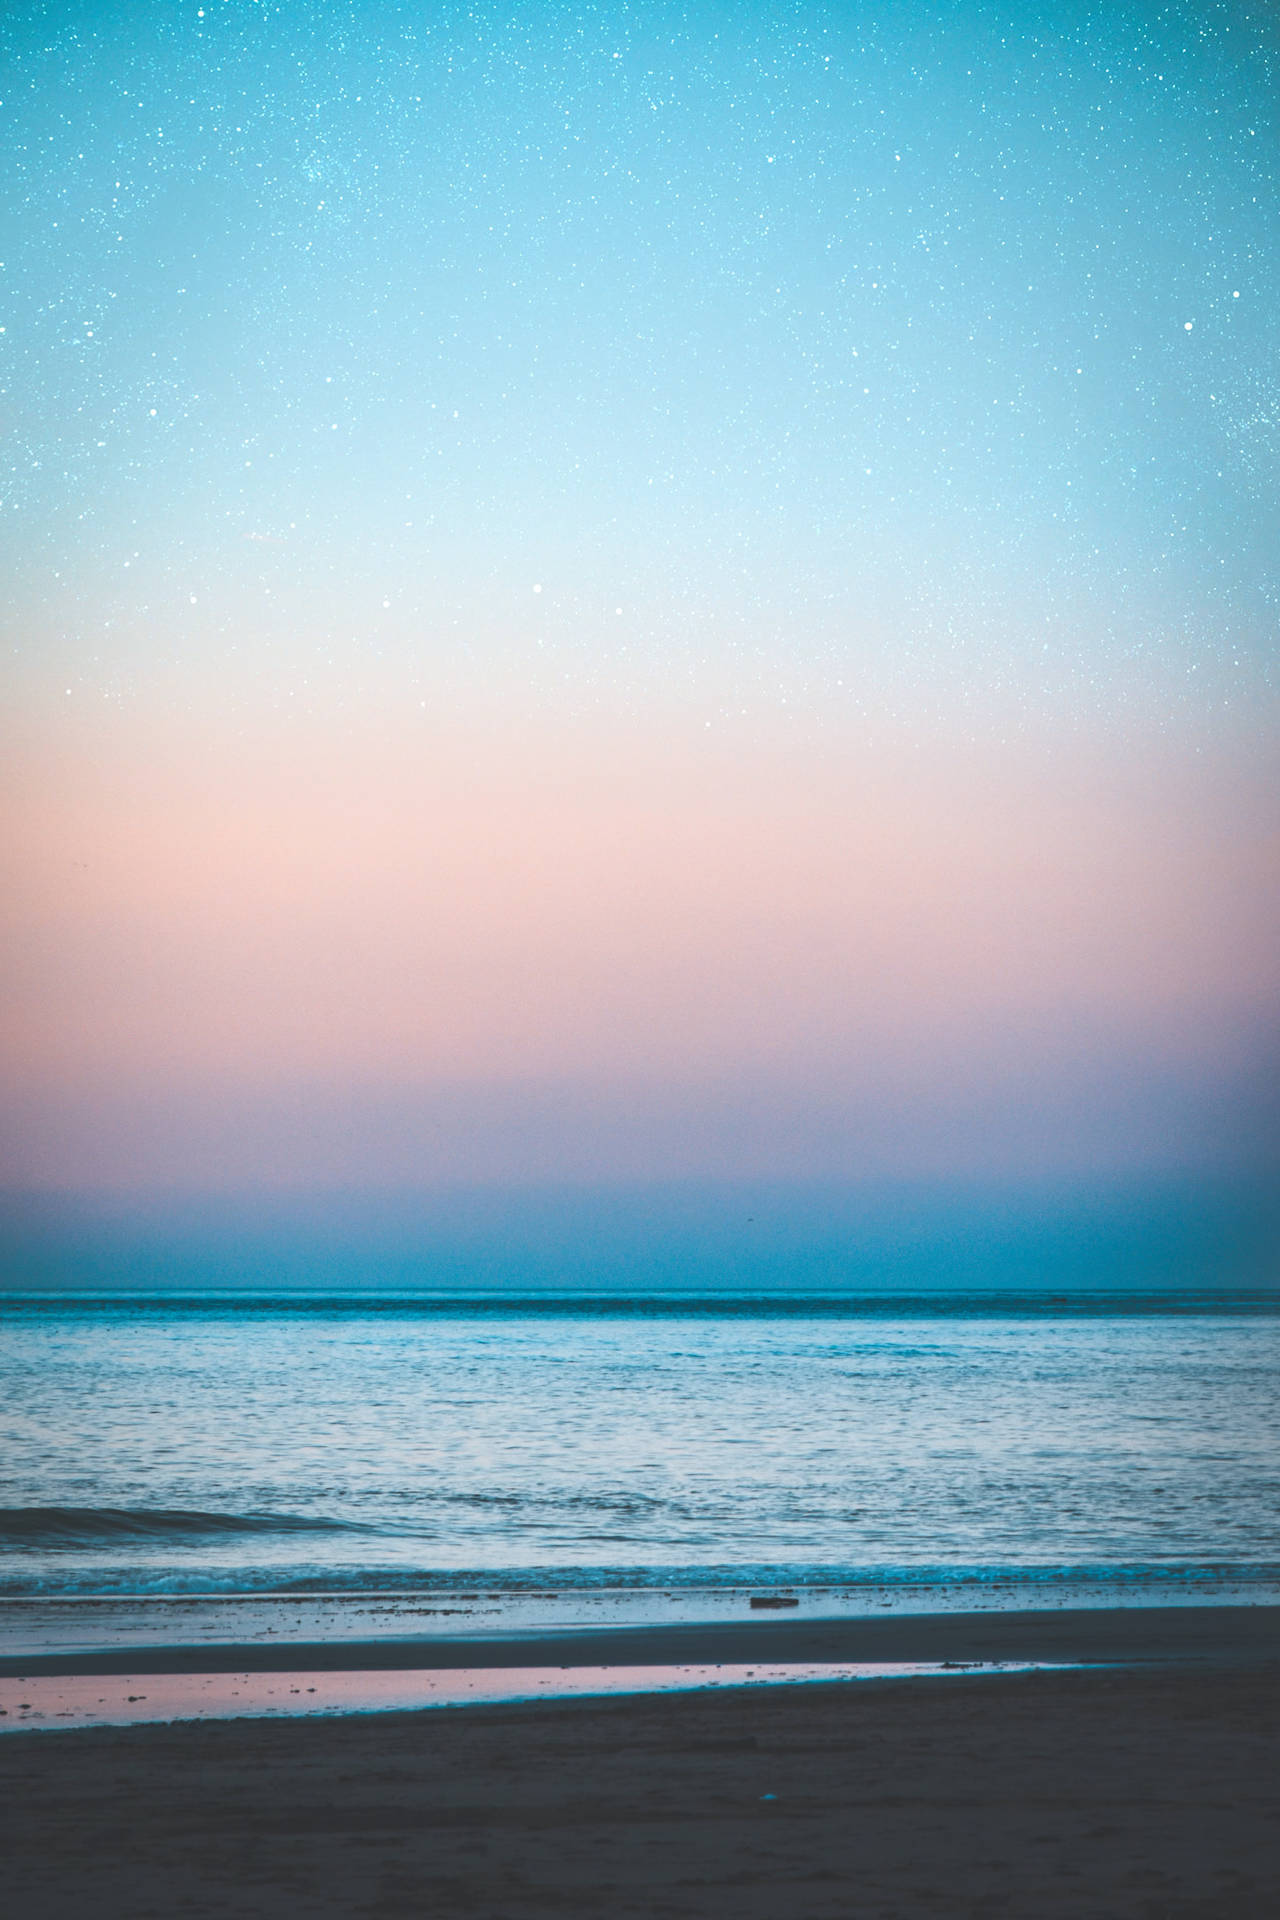 Ocean Blue Waters And Starry Sky Background